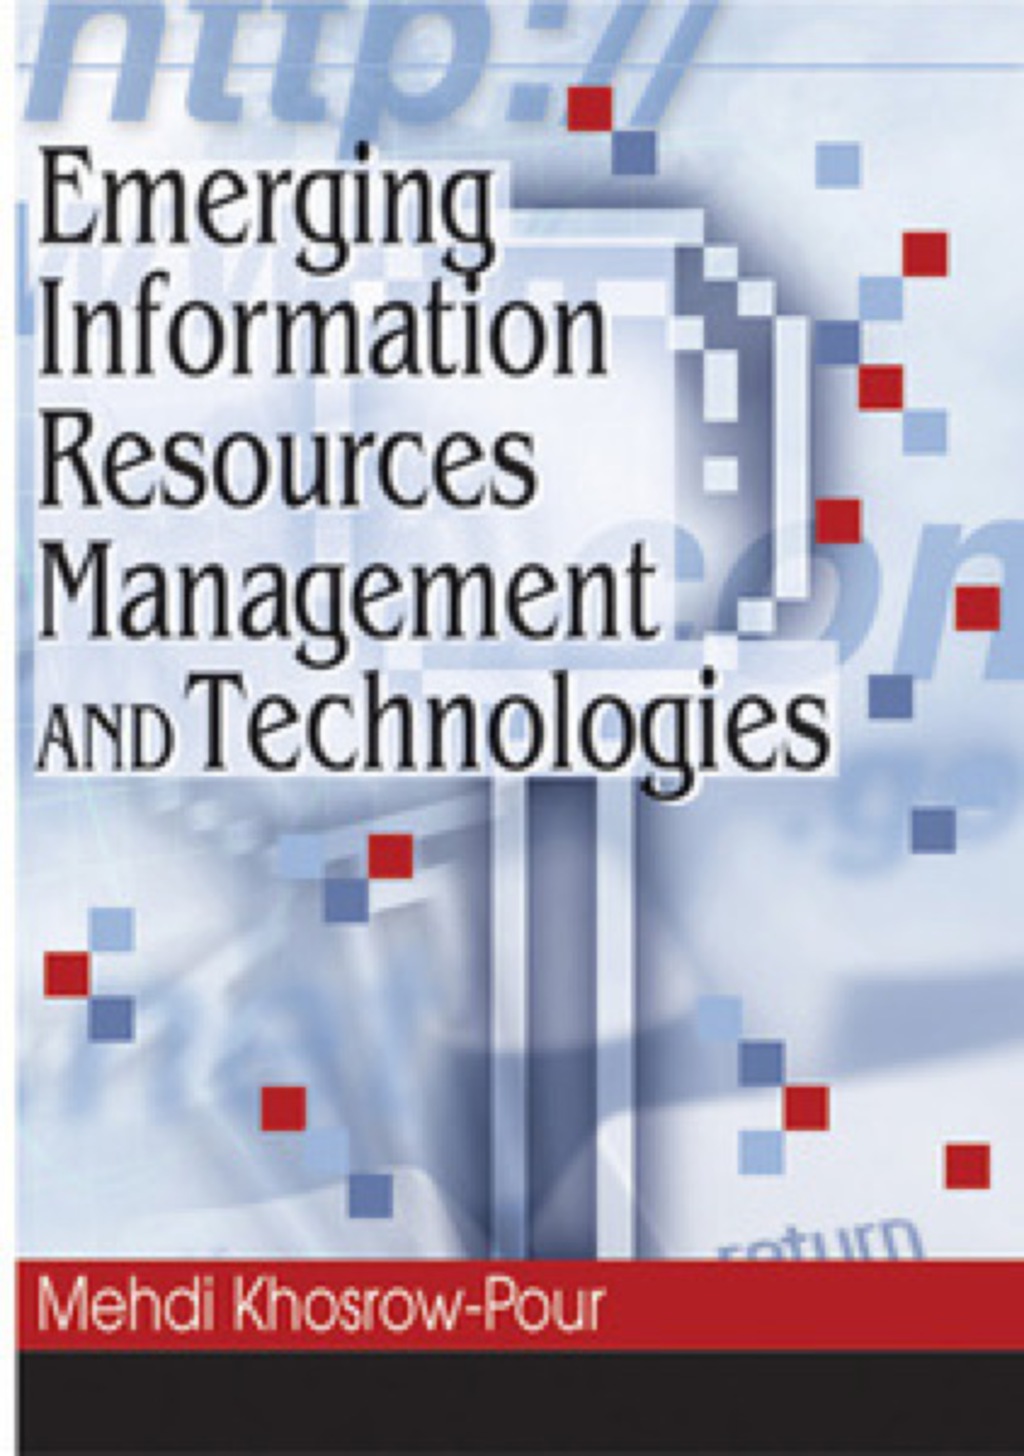 Emerging Information Resources Management and Technologies (eBook) - Mehdi Khosrow-Pour,